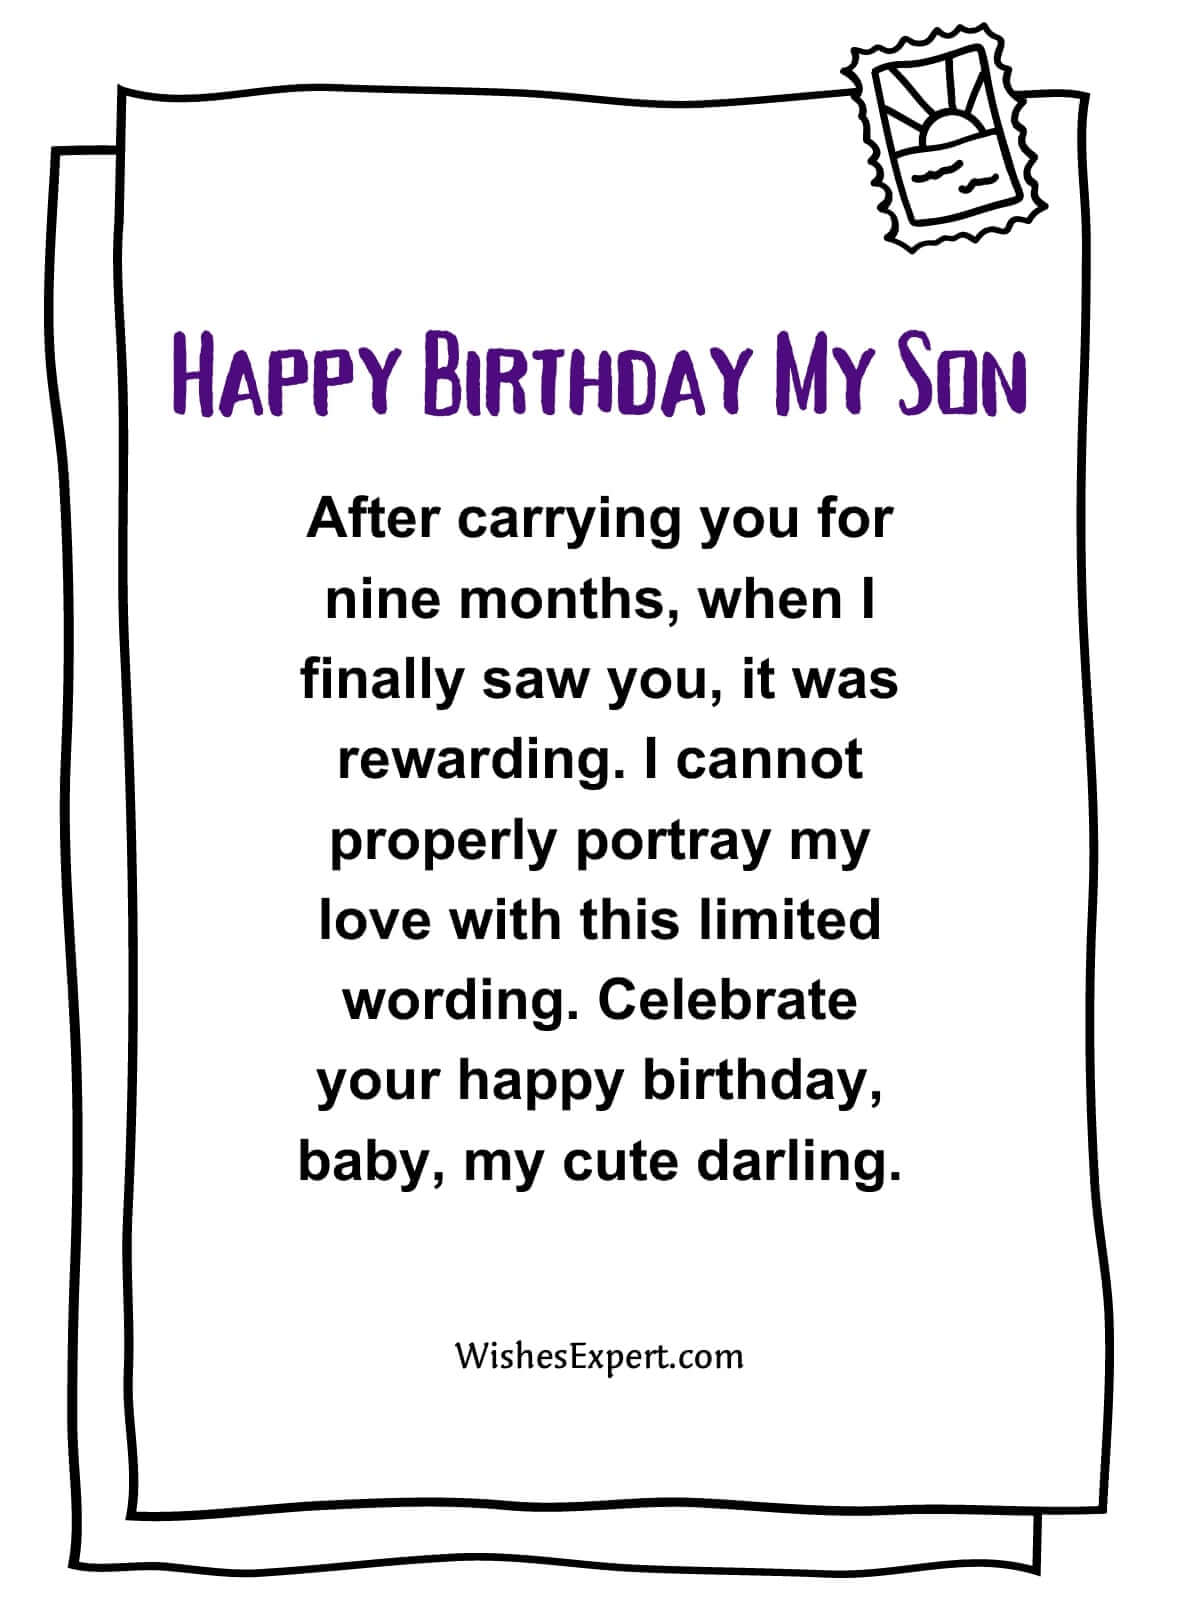 Happy Birthday to My First-Born Son from Mom